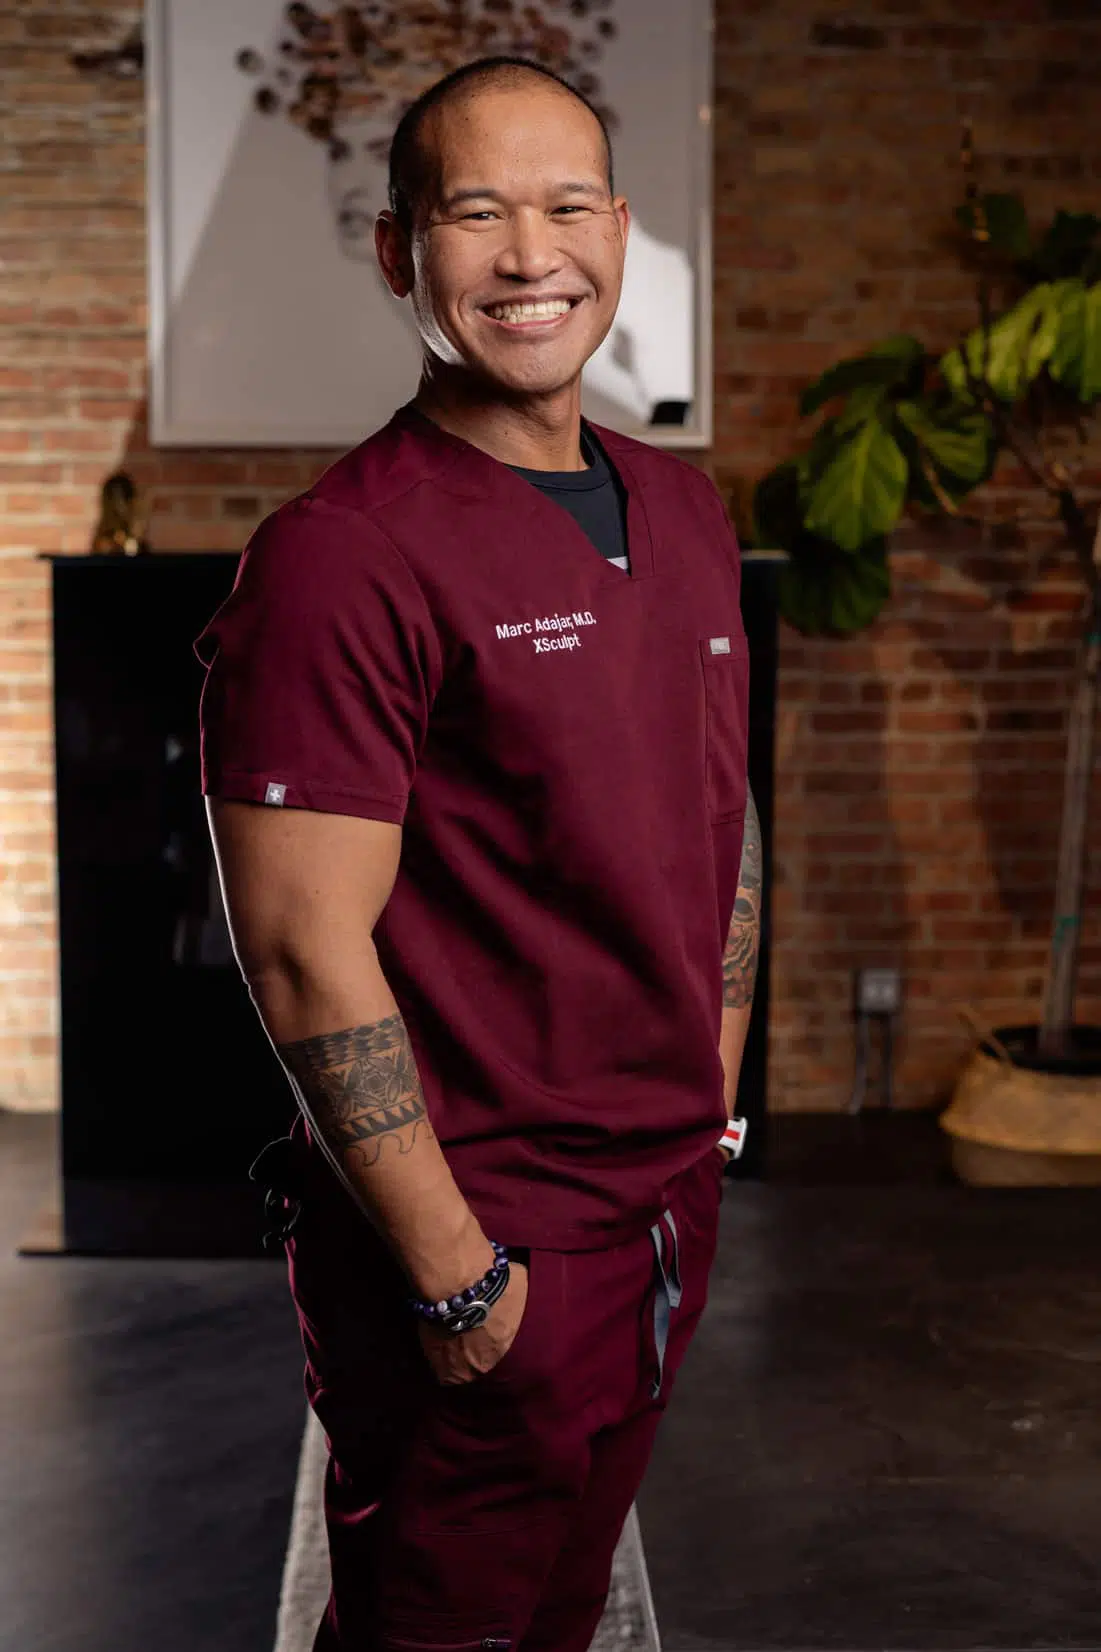 A man in scrubs smiling in front of a brick wall showcasing abdominal etching.